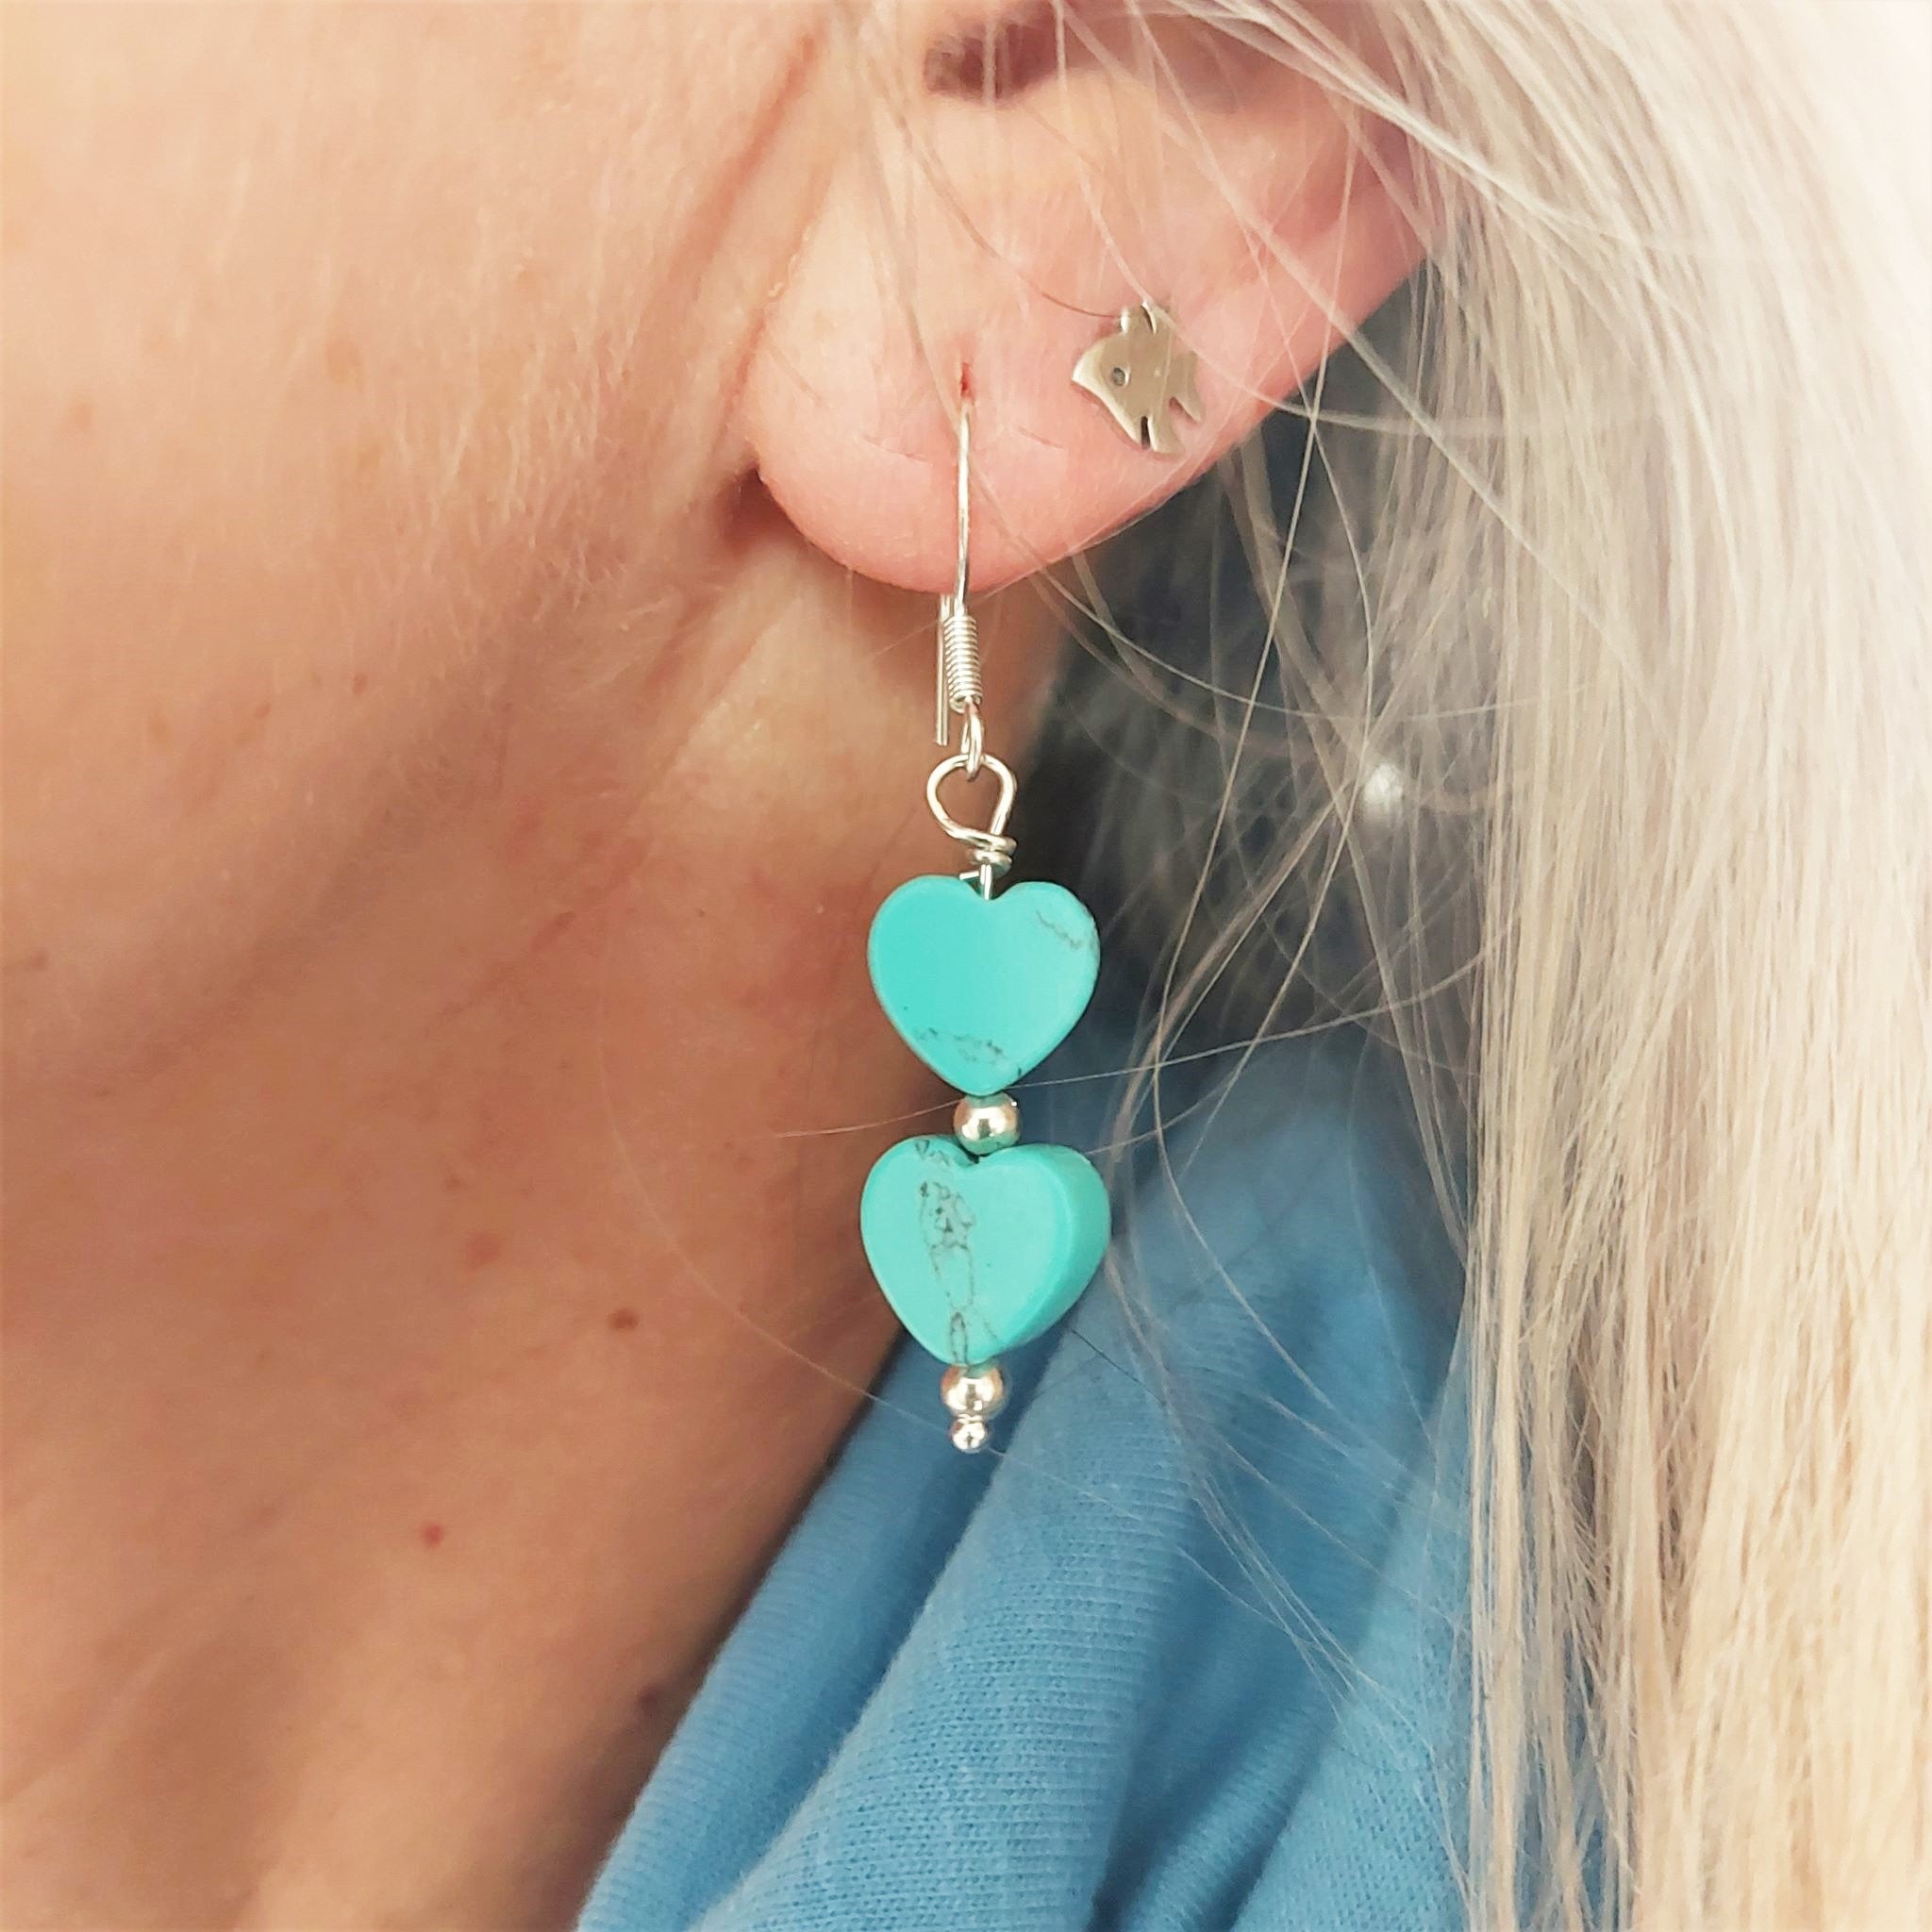 Gorgeous Handmade Turquoise stone heart earrings with sterling silver beads 925 Sterling Silver Hook Length 30mm from bottom of hook Add a pop of colour to your outfit! **Presented in lovely Kraft paper gift box with reusable organza pouch**